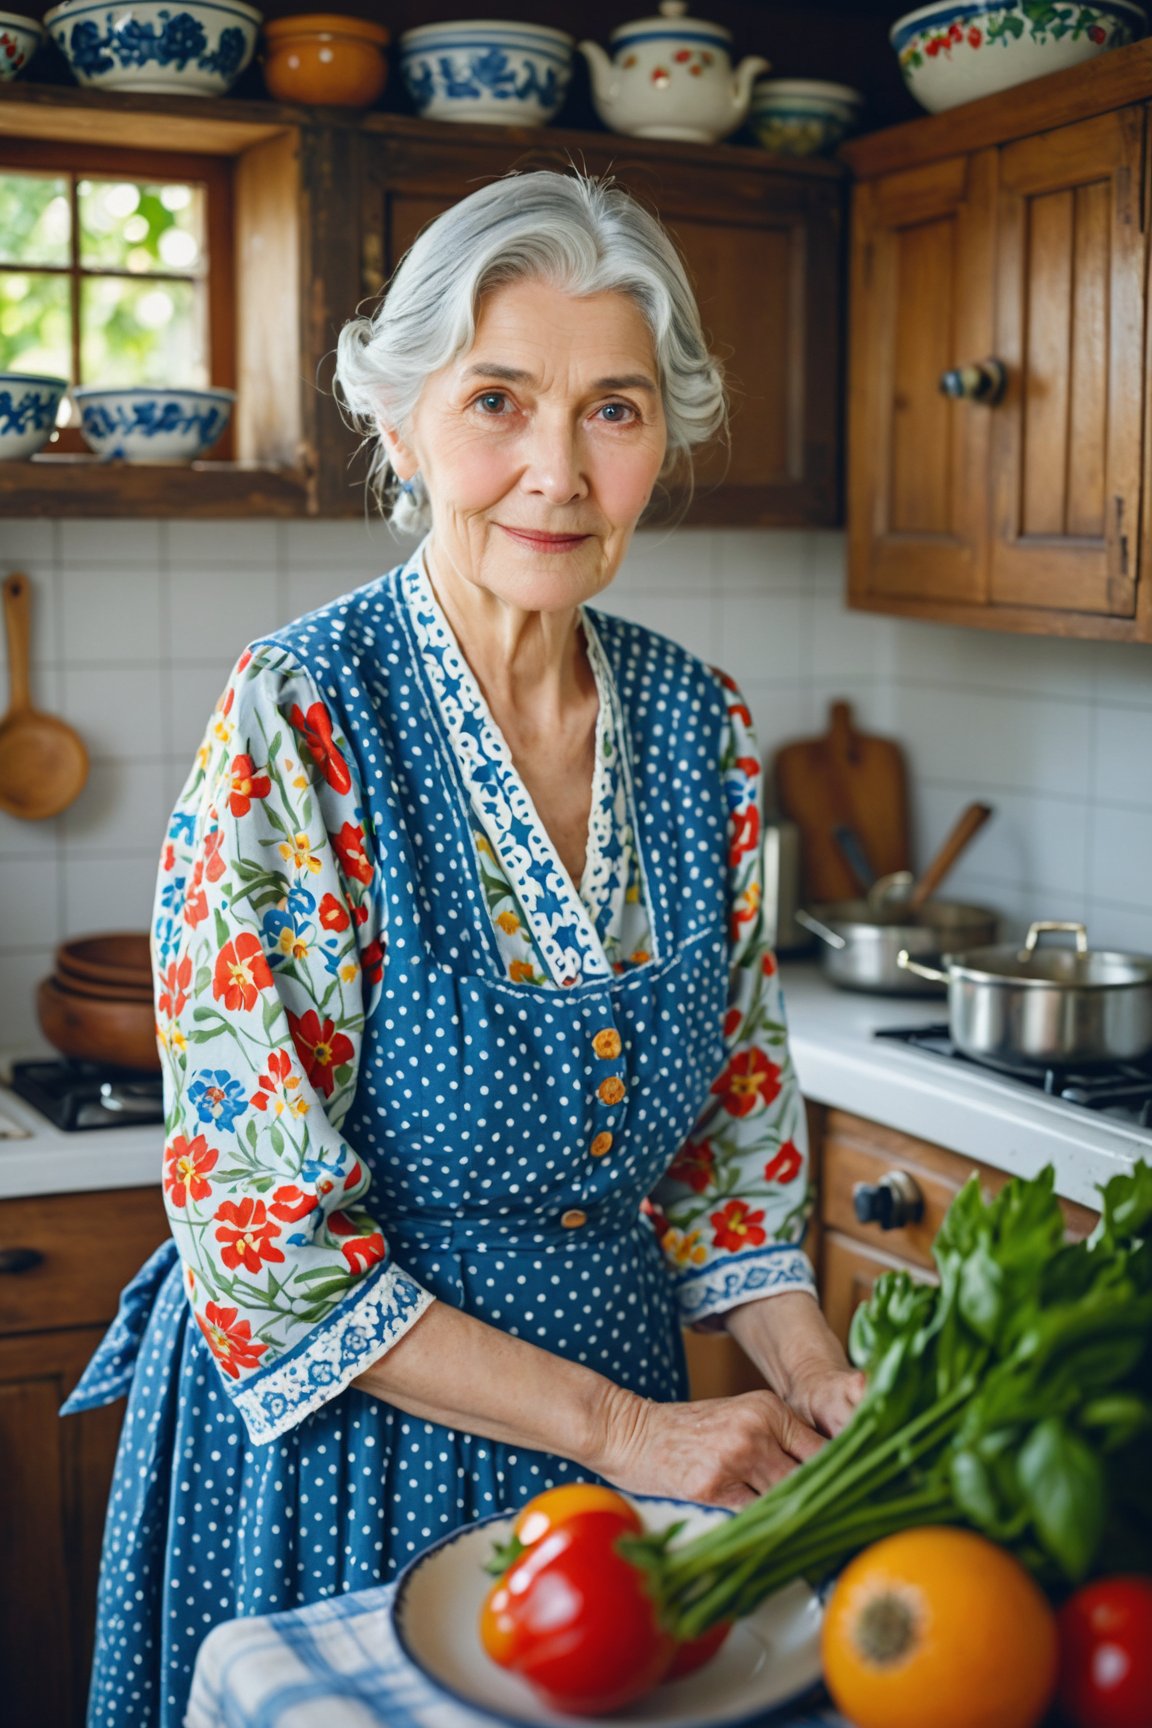 A gray-haired and elegant old woman whose eyes stared at the viewer was full of story. She wore a traditional floral-patterned dress in a quaint,  sunny cottage kitchen and cooking